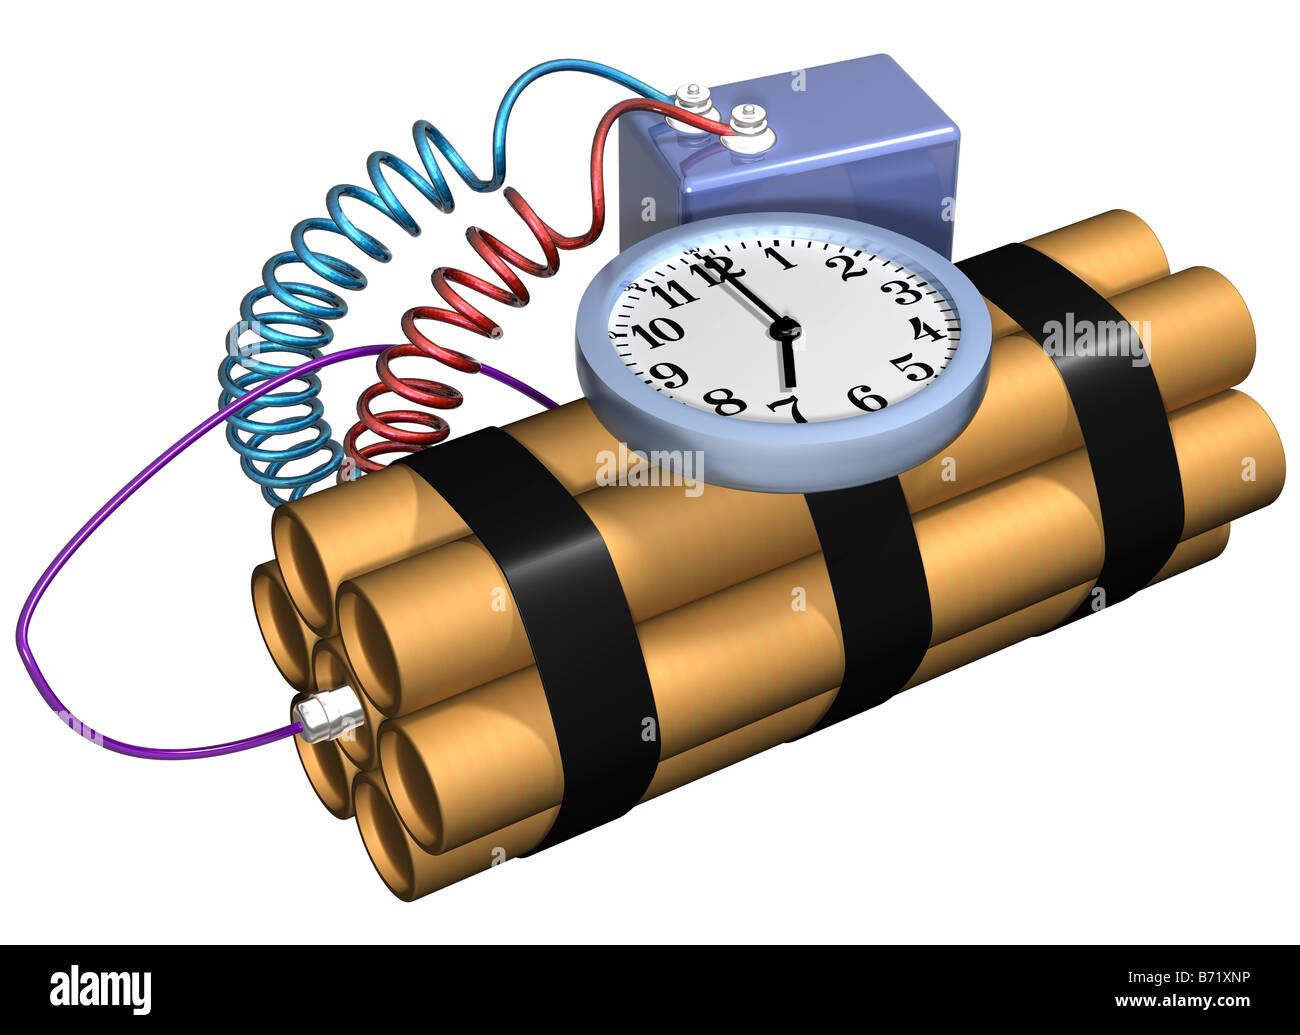 Isolated illustration of a time bomb primed and ready for action Stock Photo